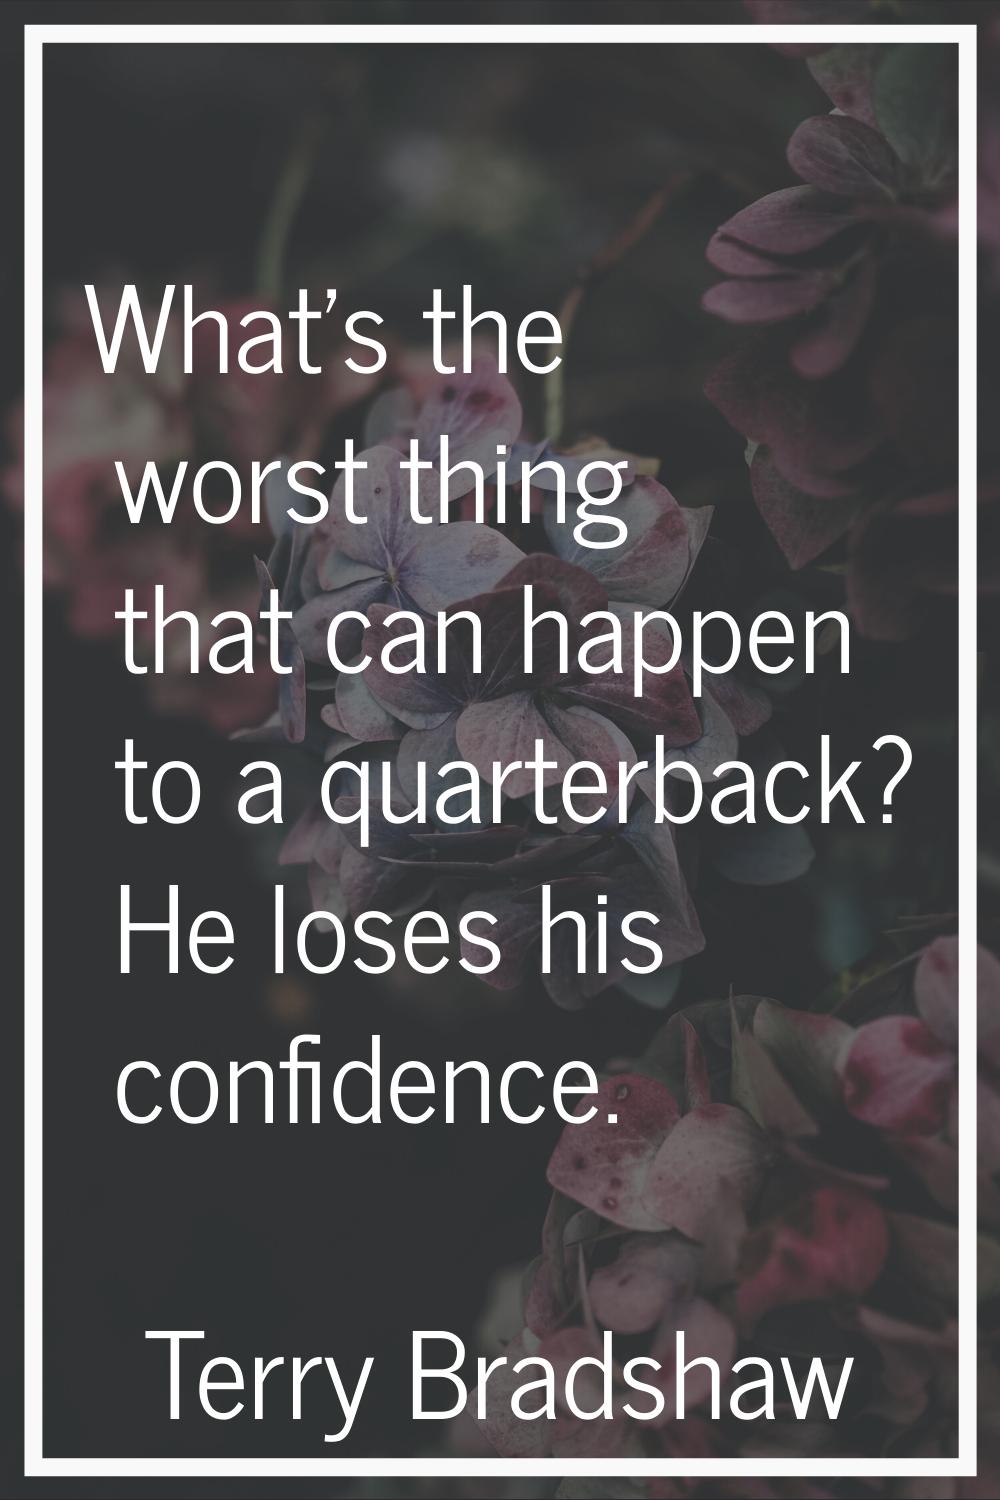 What's the worst thing that can happen to a quarterback? He loses his confidence.